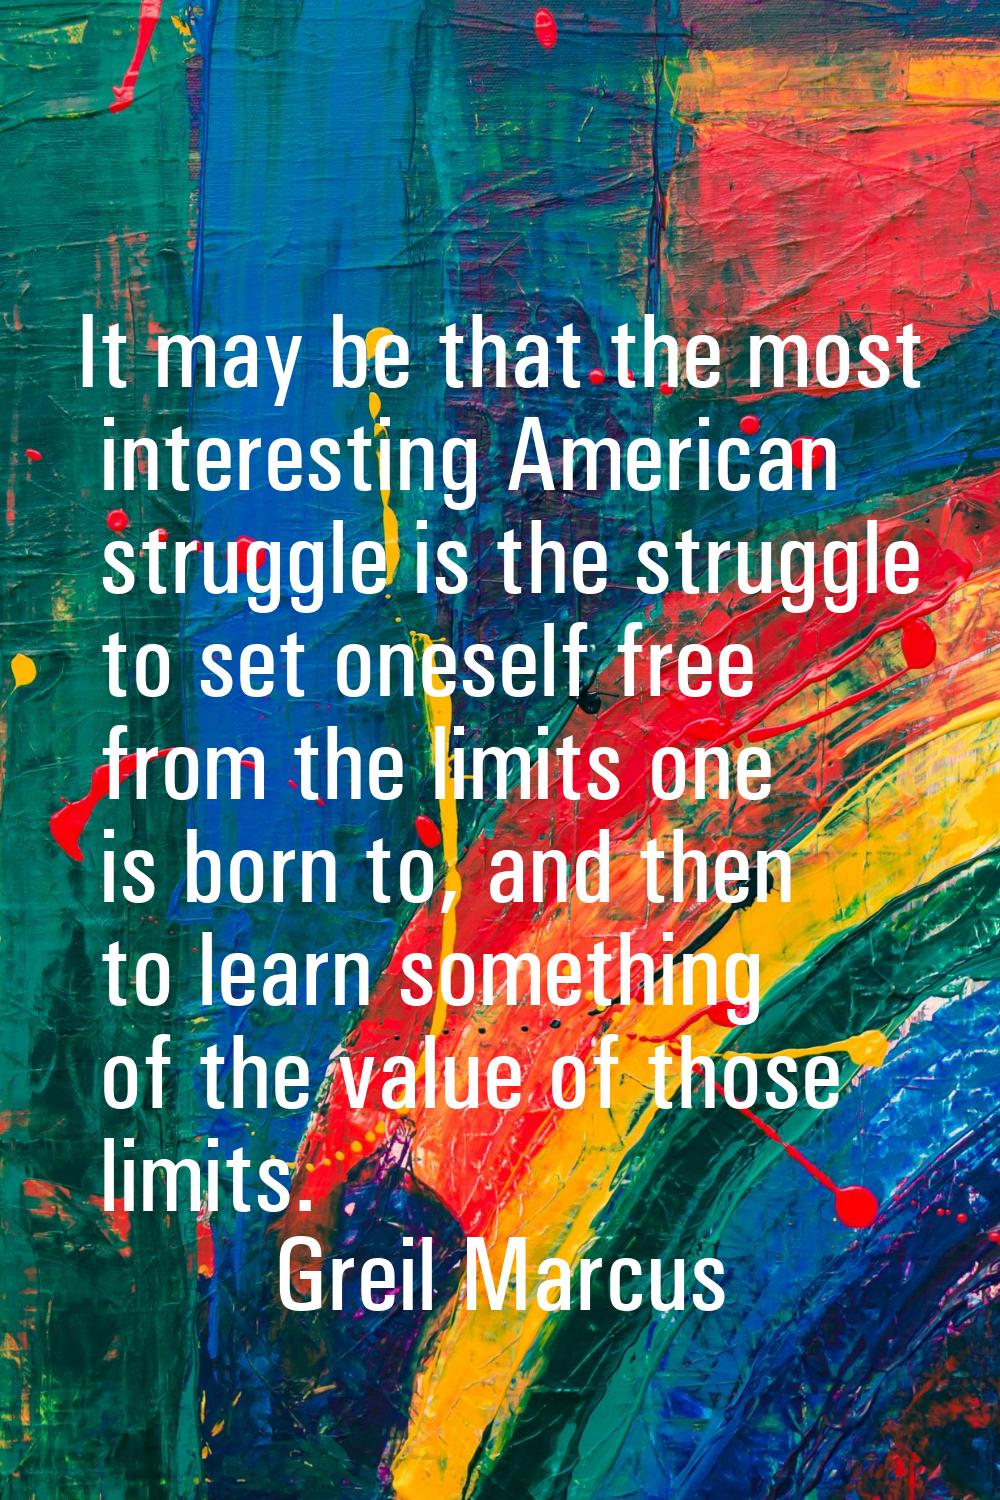 It may be that the most interesting American struggle is the struggle to set oneself free from the 